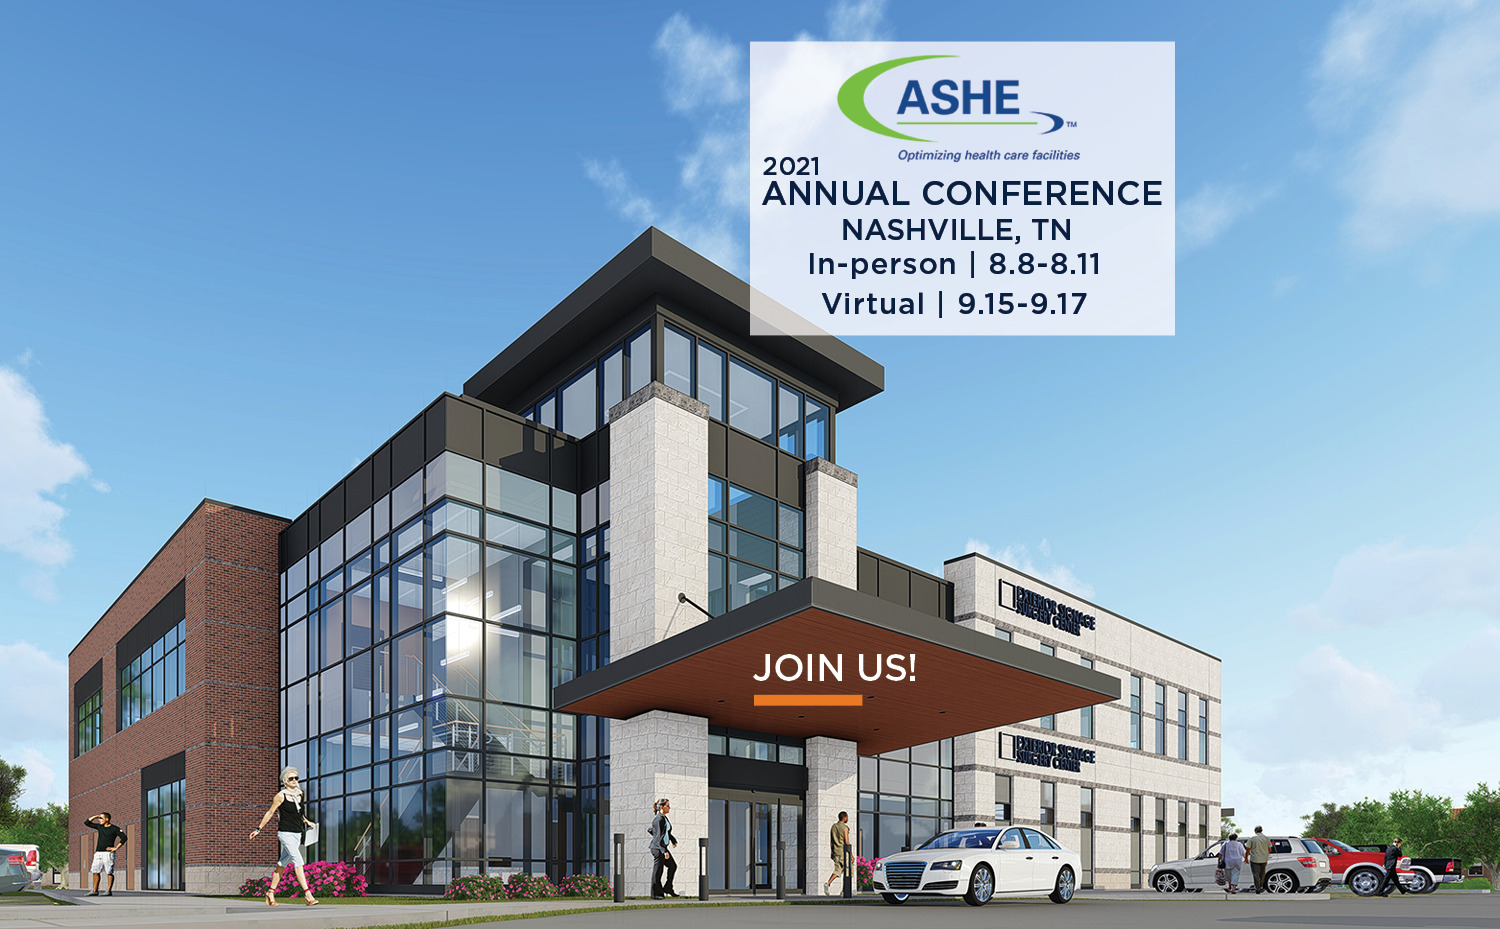 Join Us at the ASHE Annual Conference E4H